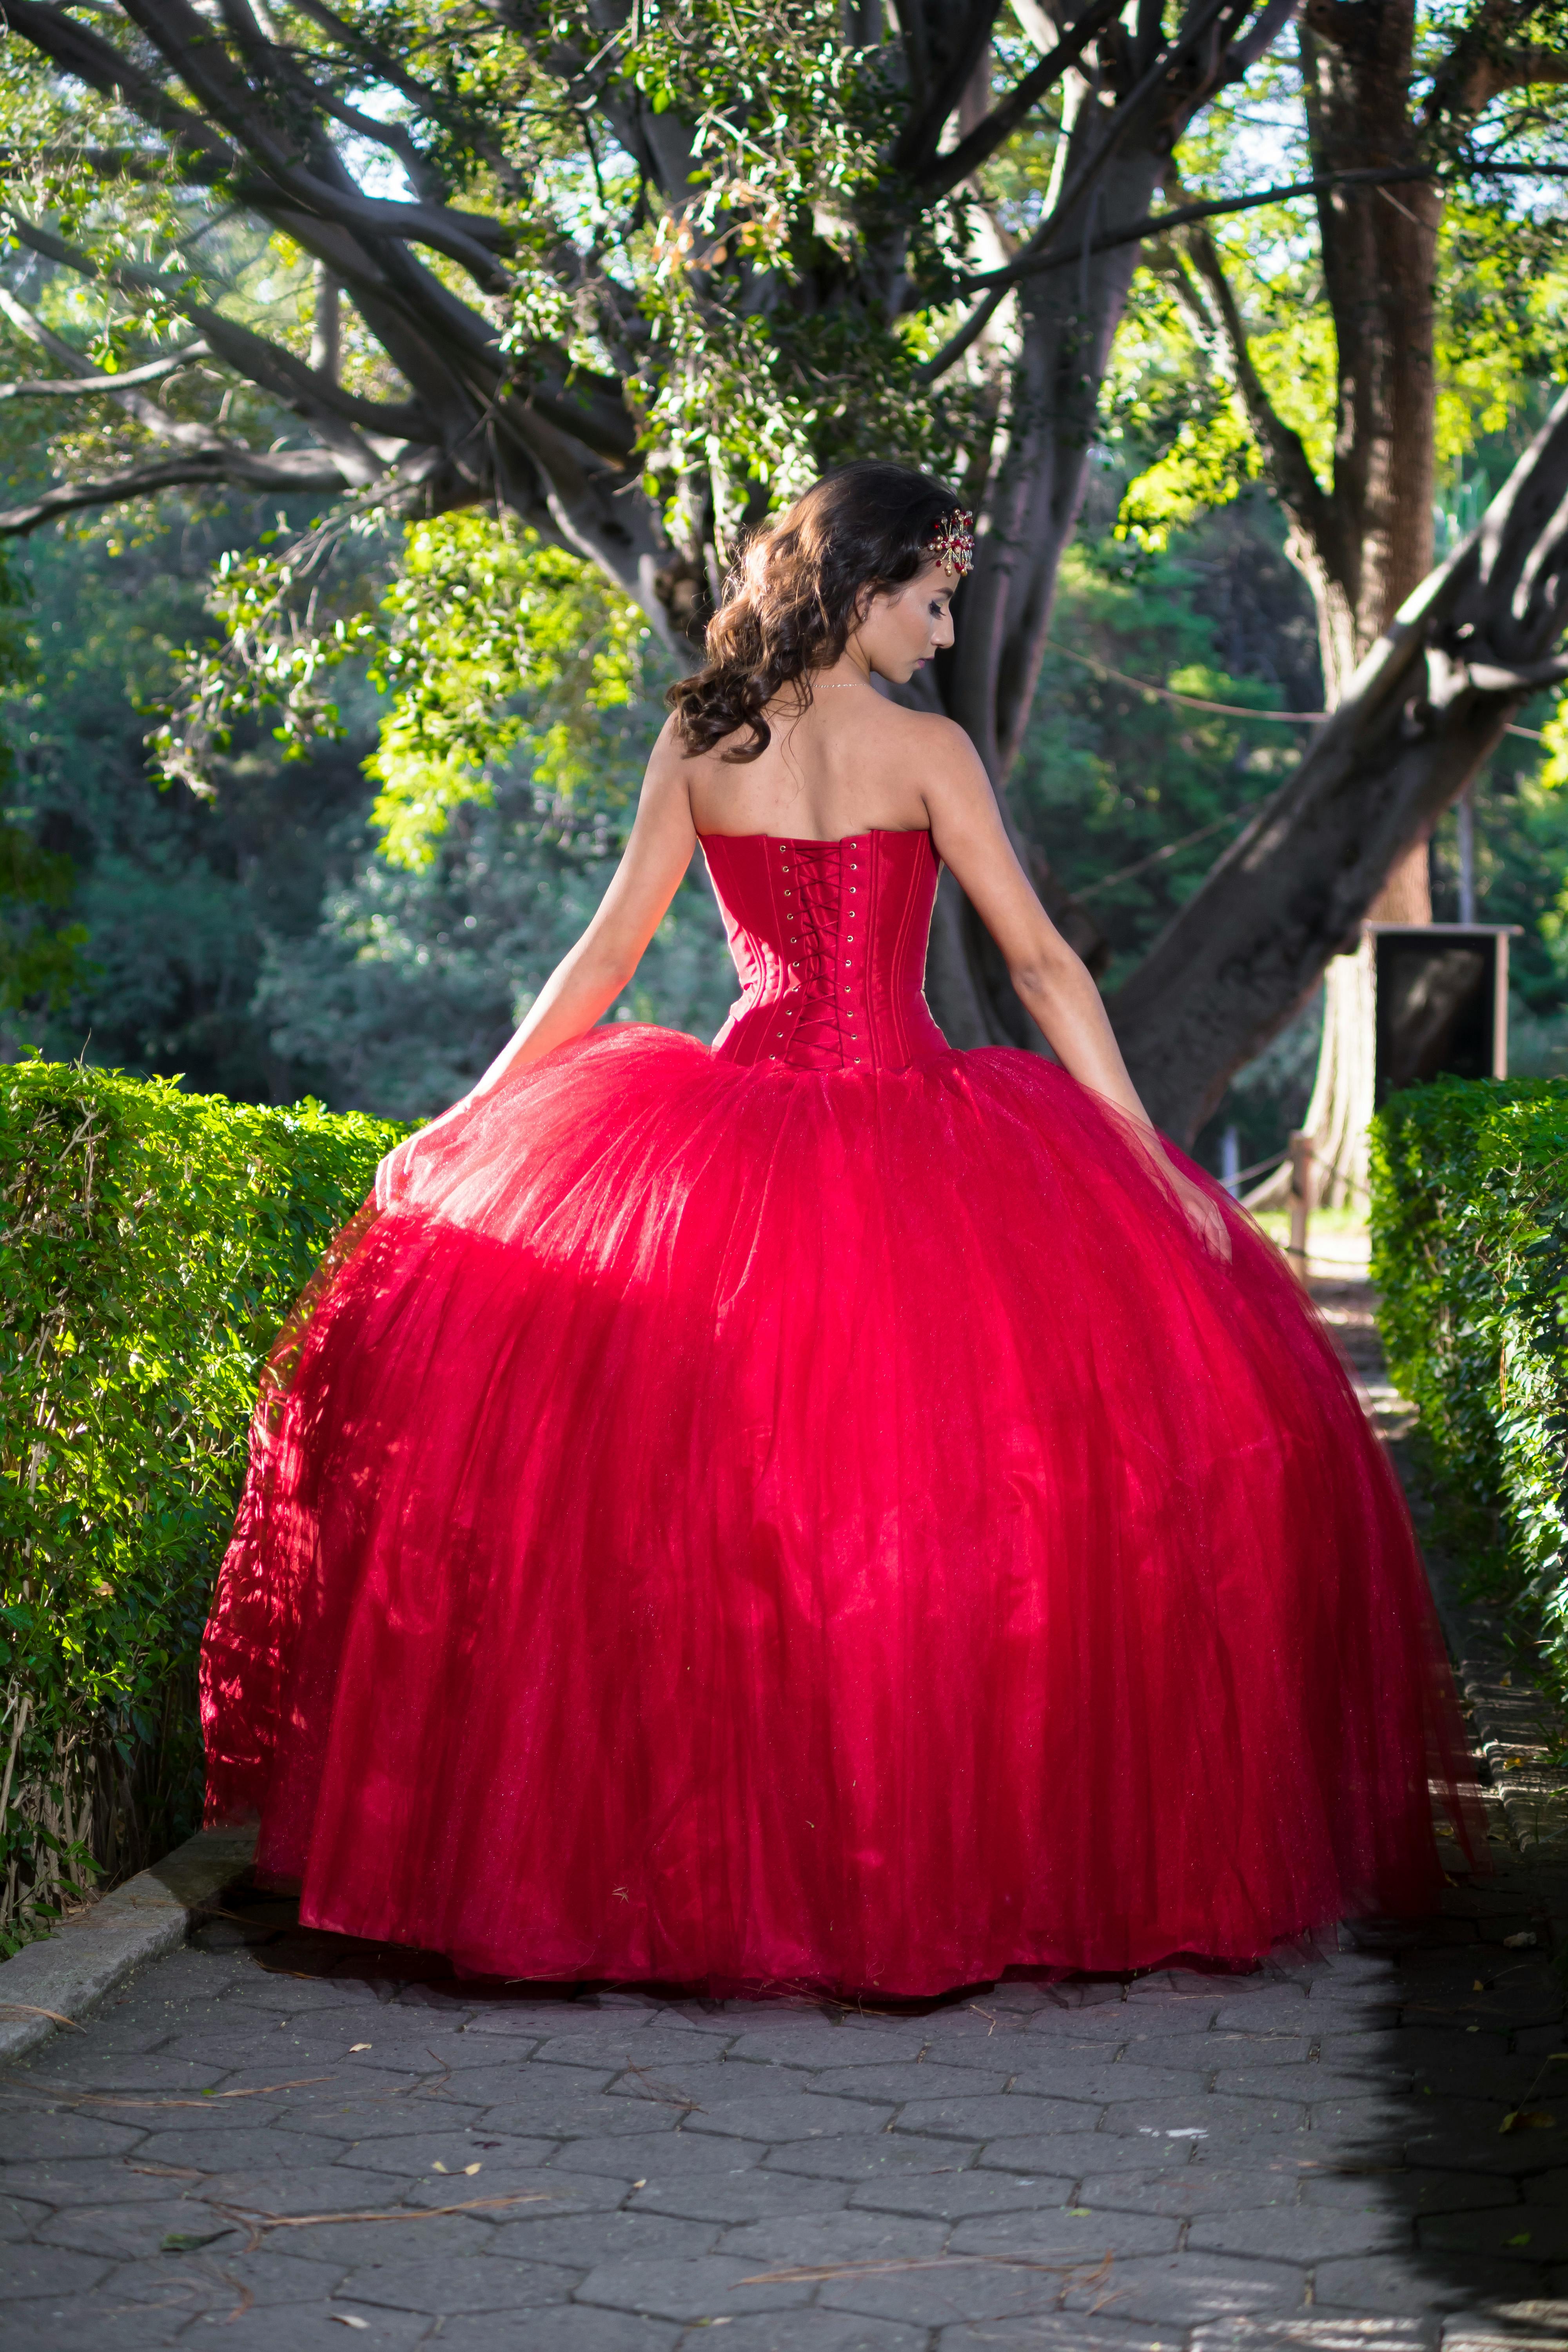 A Woman Wearing a Red Gown · Free Stock Photo